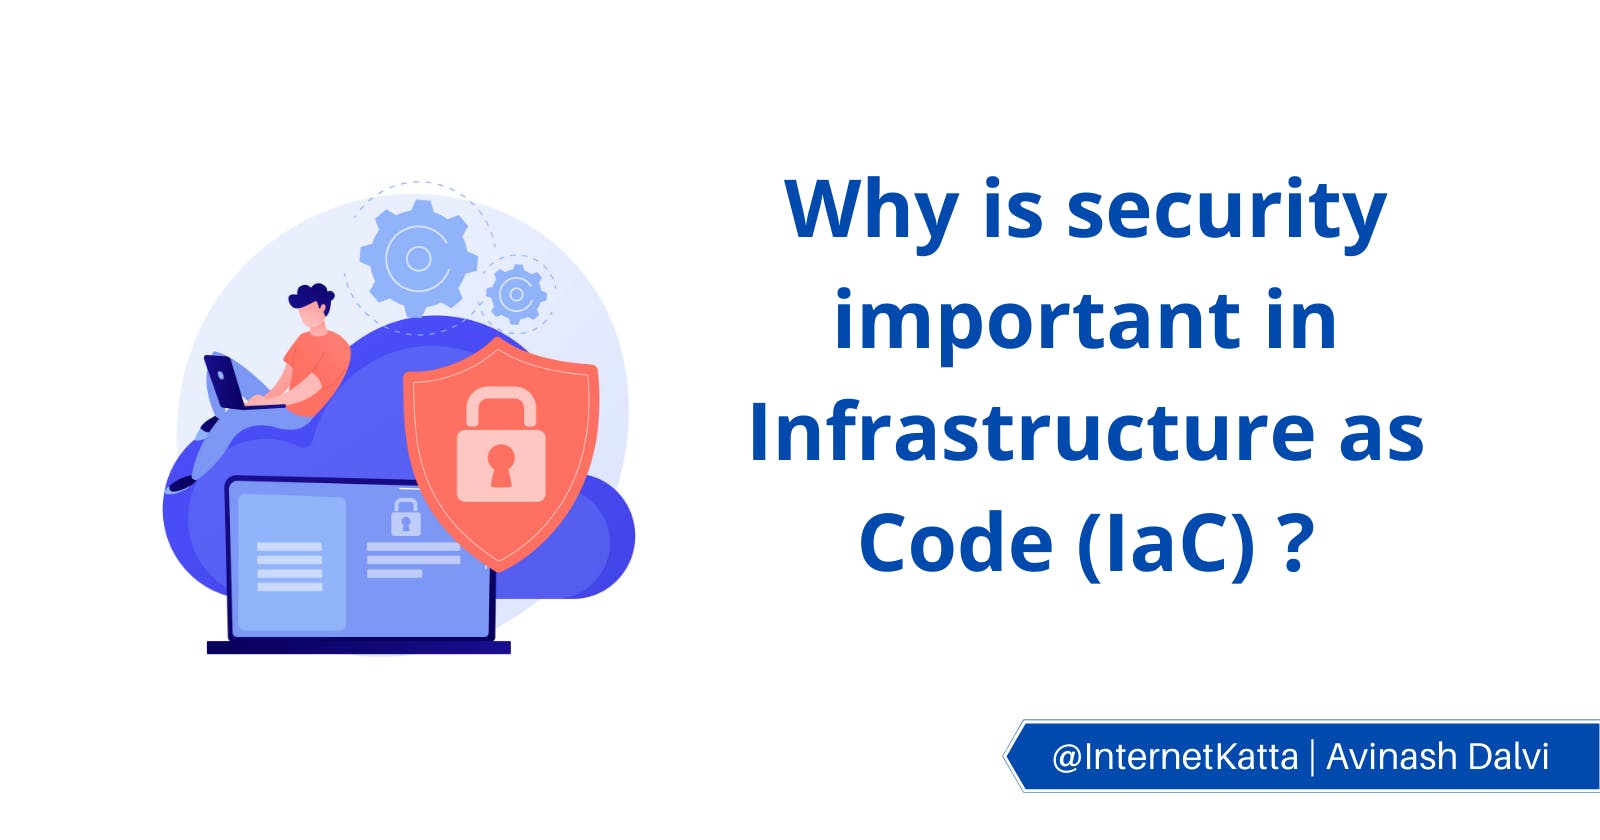 Why is security important in infrastructure as code ?